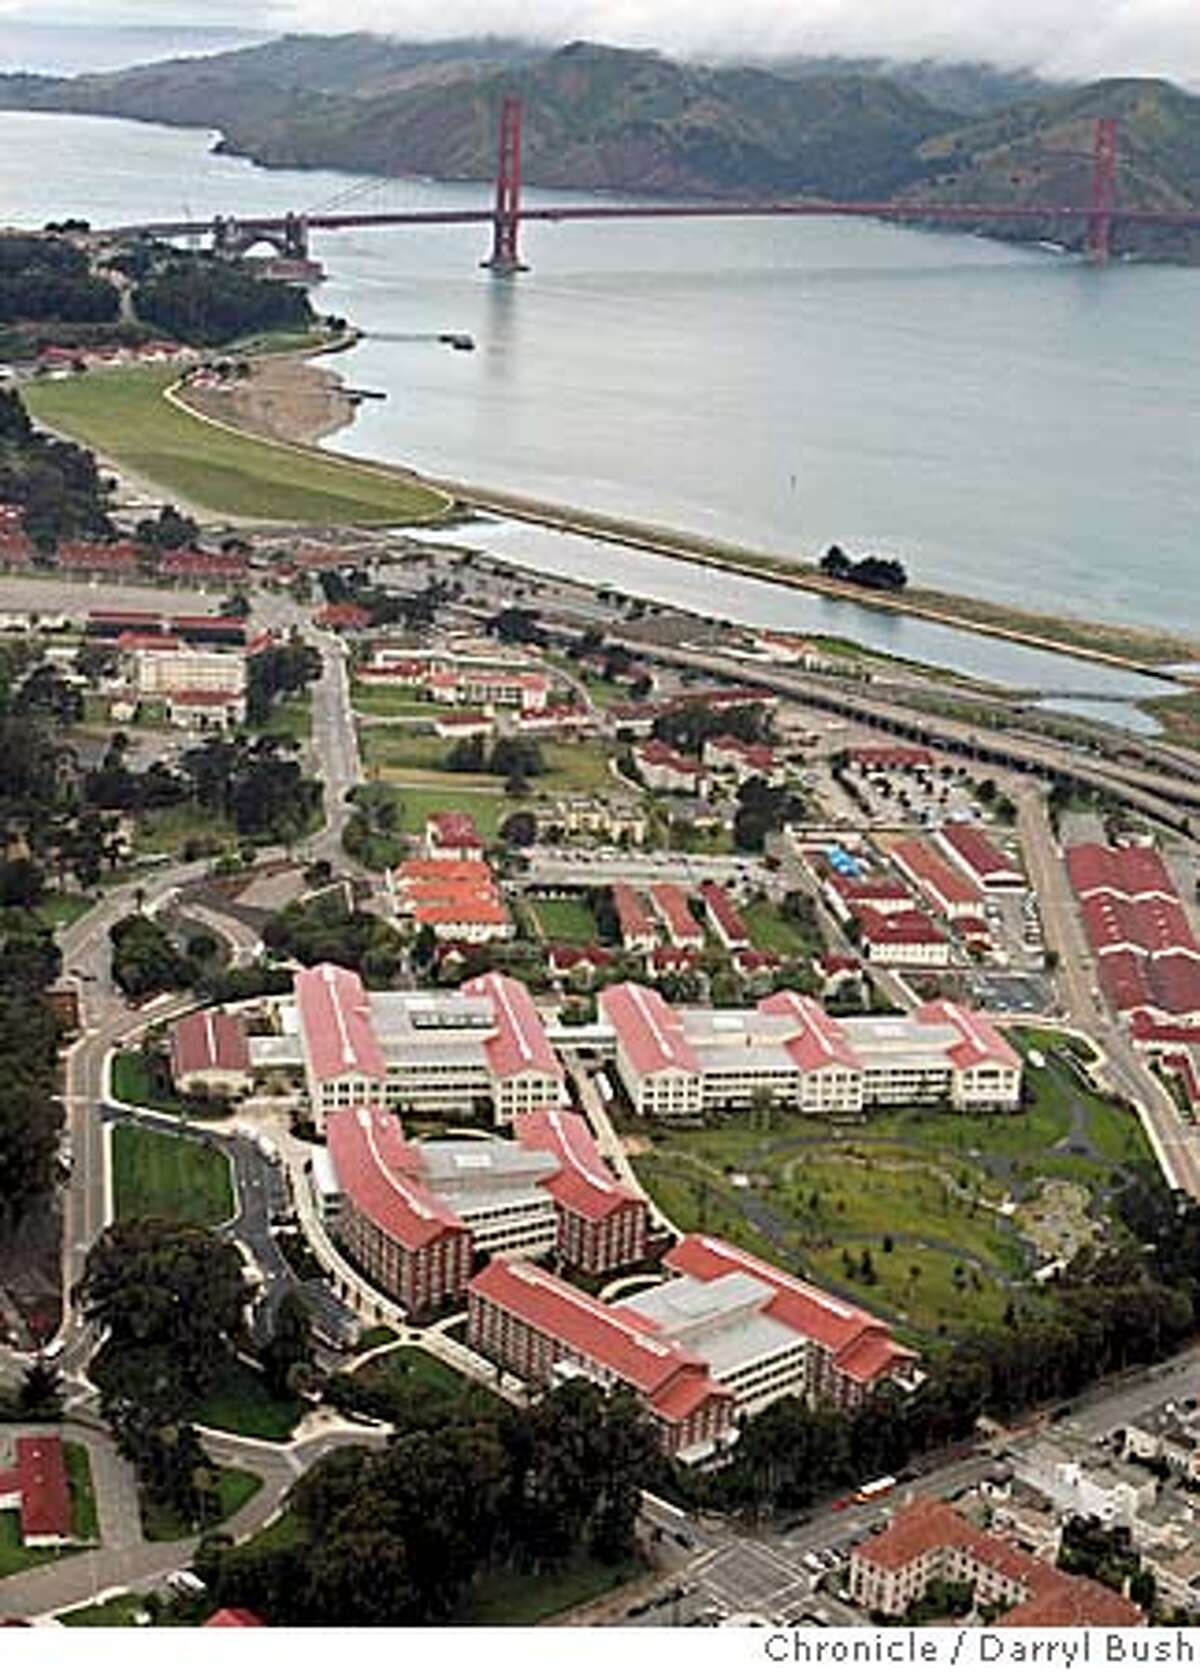 presidio_136_db.jpg Aerial view of George Lucas's new Lucasfilm headquarters; the complex called, "Letterman Digital Arts Center at the Presidio," bottom center with the Golden Gate Bridge in the background, nears completion at the Presidio of San Francisco Golden Gate National Recreation Area. Event on 5/6/05 in San Francisco. Darryl Bush / The Chronicle MANDATORY CREDIT FOR PHOTOG AND SF CHRONICLE/ -MAGS OUT